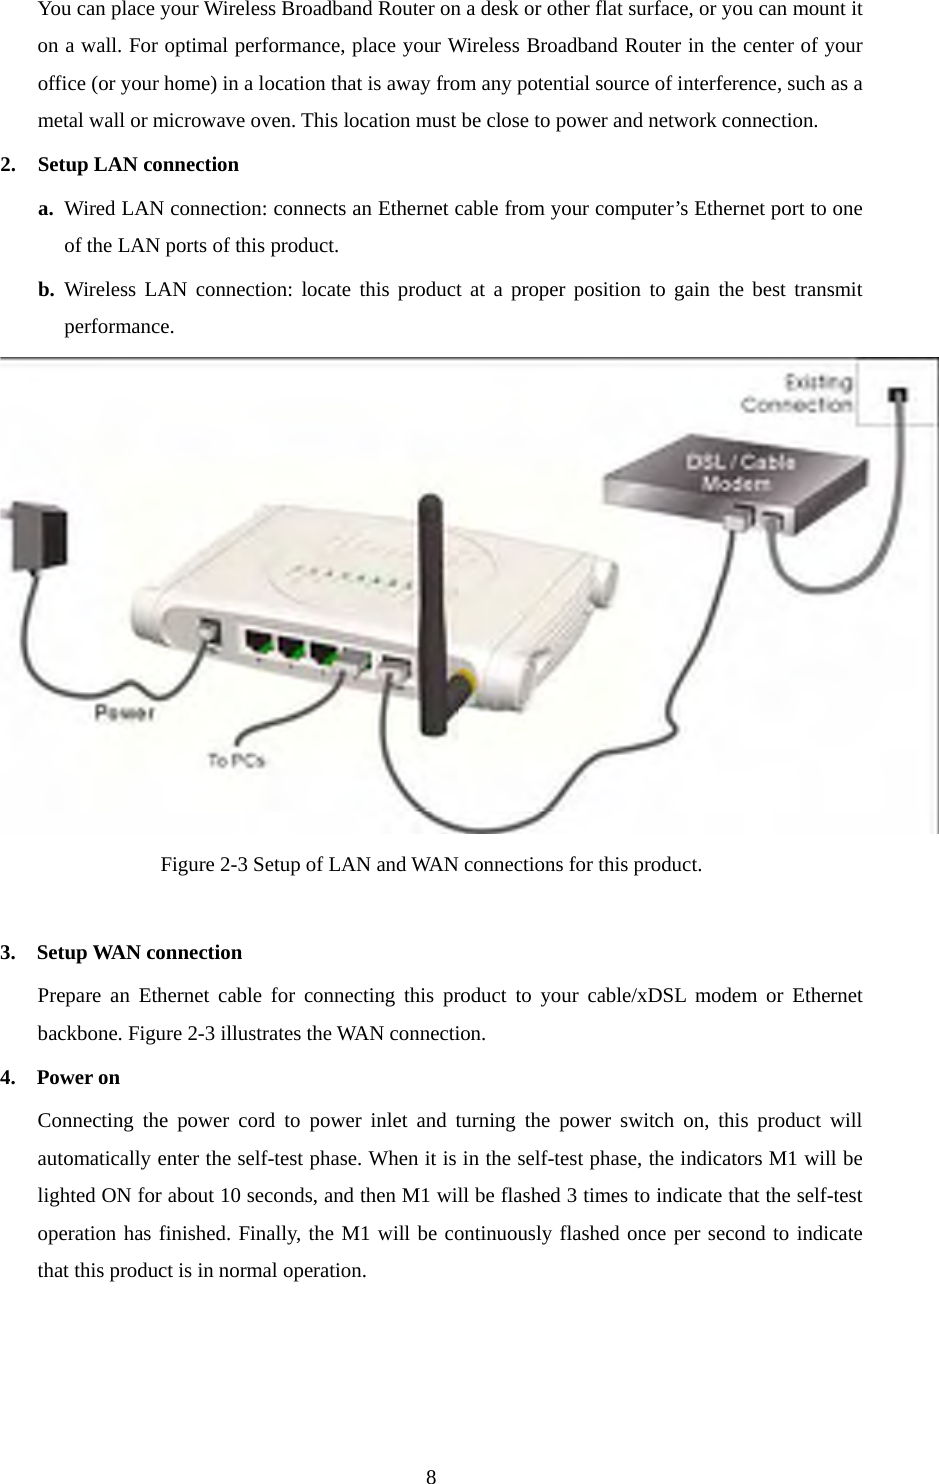 You can place your Wireless Broadband Router on a desk or other flat surface, or you can mount it on a wall. For optimal performance, place your Wireless Broadband Router in the center of your office (or your home) in a location that is away from any potential source of interference, such as a metal wall or microwave oven. This location must be close to power and network connection. 2. Setup LAN connection a. Wired LAN connection: connects an Ethernet cable from your computer’s Ethernet port to one of the LAN ports of this product. b. Wireless LAN connection: locate this product at a proper position to gain the best transmit performance.  Figure 2-3 Setup of LAN and WAN connections for this product.  3.  Setup WAN connection Prepare an Ethernet cable for connecting this product to your cable/xDSL modem or Ethernet backbone. Figure 2-3 illustrates the WAN connection. 4.  Power on  Connecting the power cord to power inlet and turning the power switch on, this product will automatically enter the self-test phase. When it is in the self-test phase, the indicators M1 will be lighted ON for about 10 seconds, and then M1 will be flashed 3 times to indicate that the self-test operation has finished. Finally, the M1 will be continuously flashed once per second to indicate that this product is in normal operation.     8